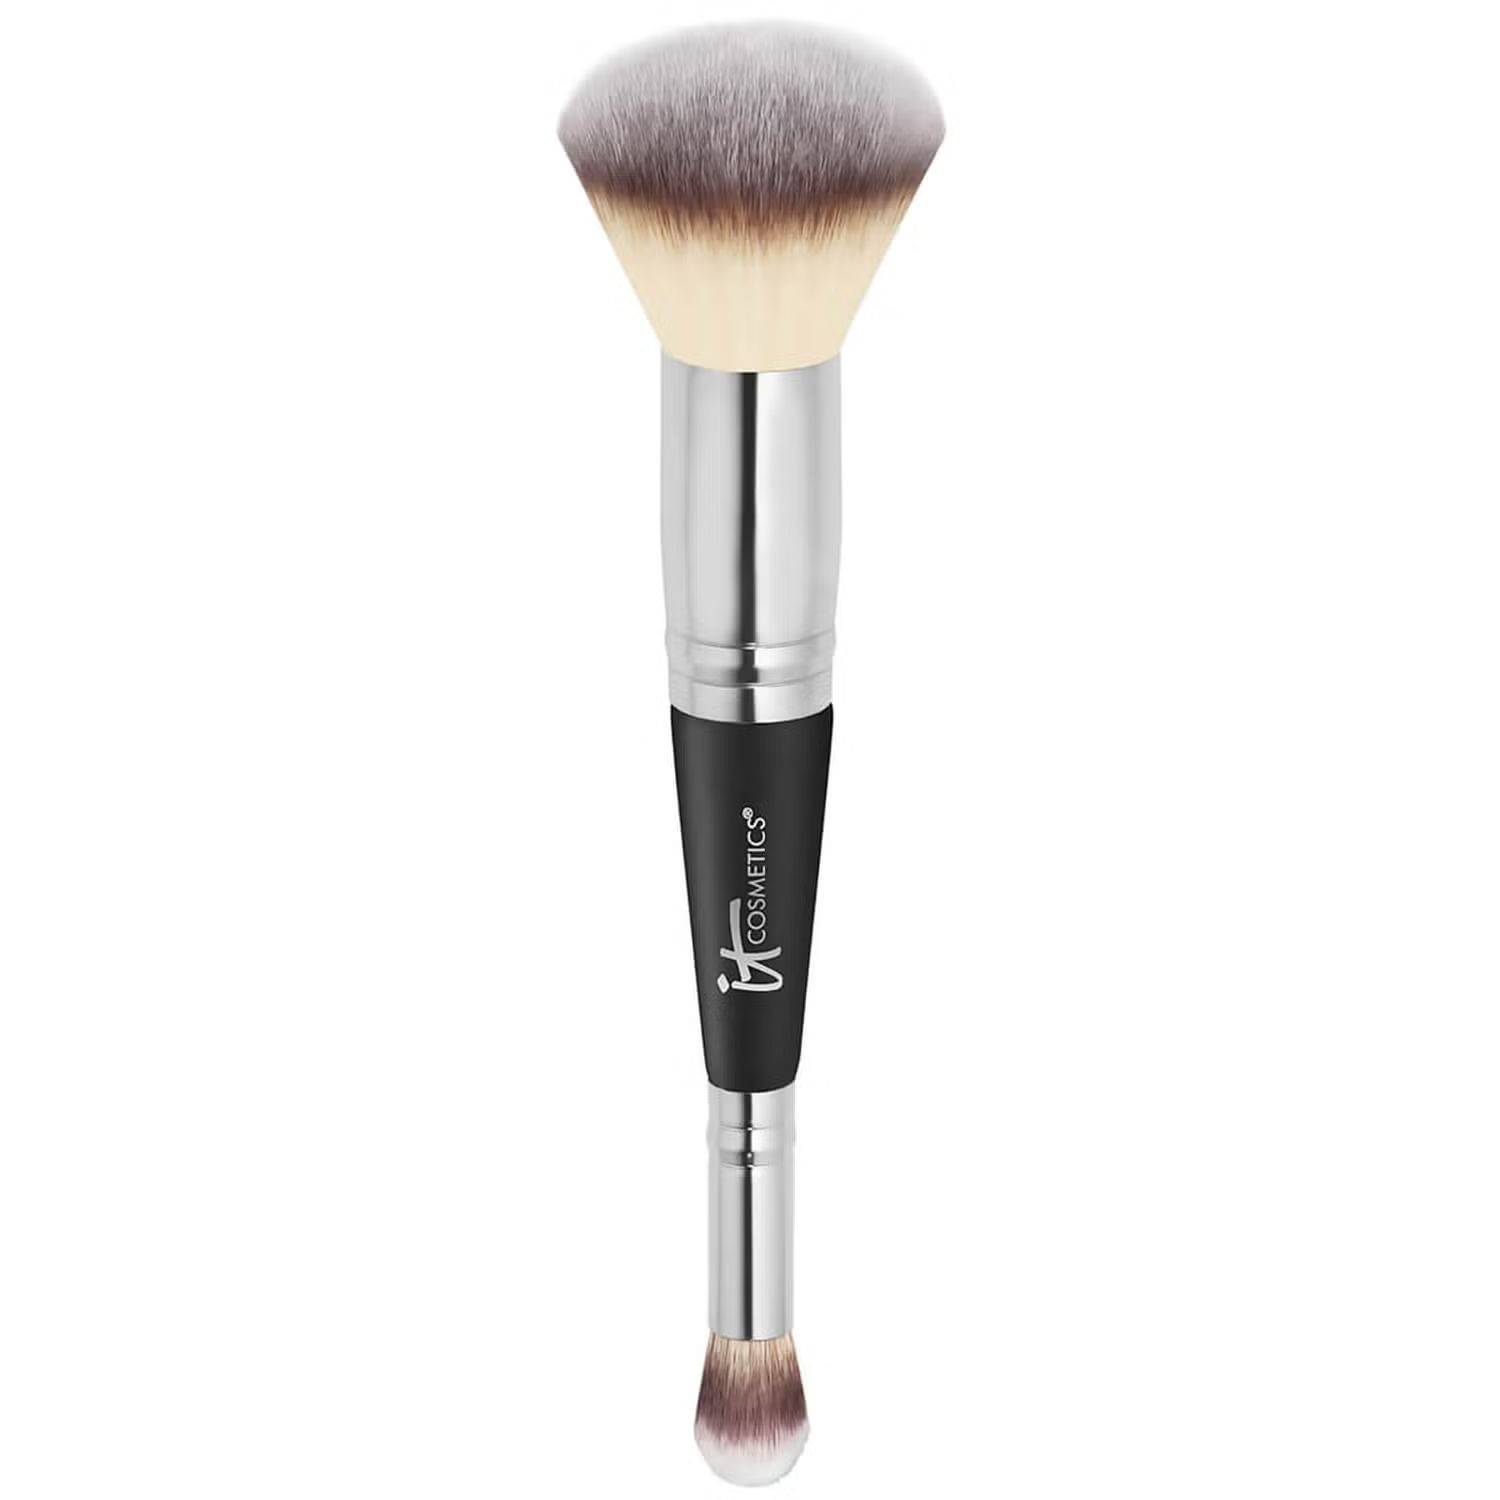 IT Cosmetics Heavenly Luxe Complexion Perfection Brush #7 | Look Fantastic (ROW)